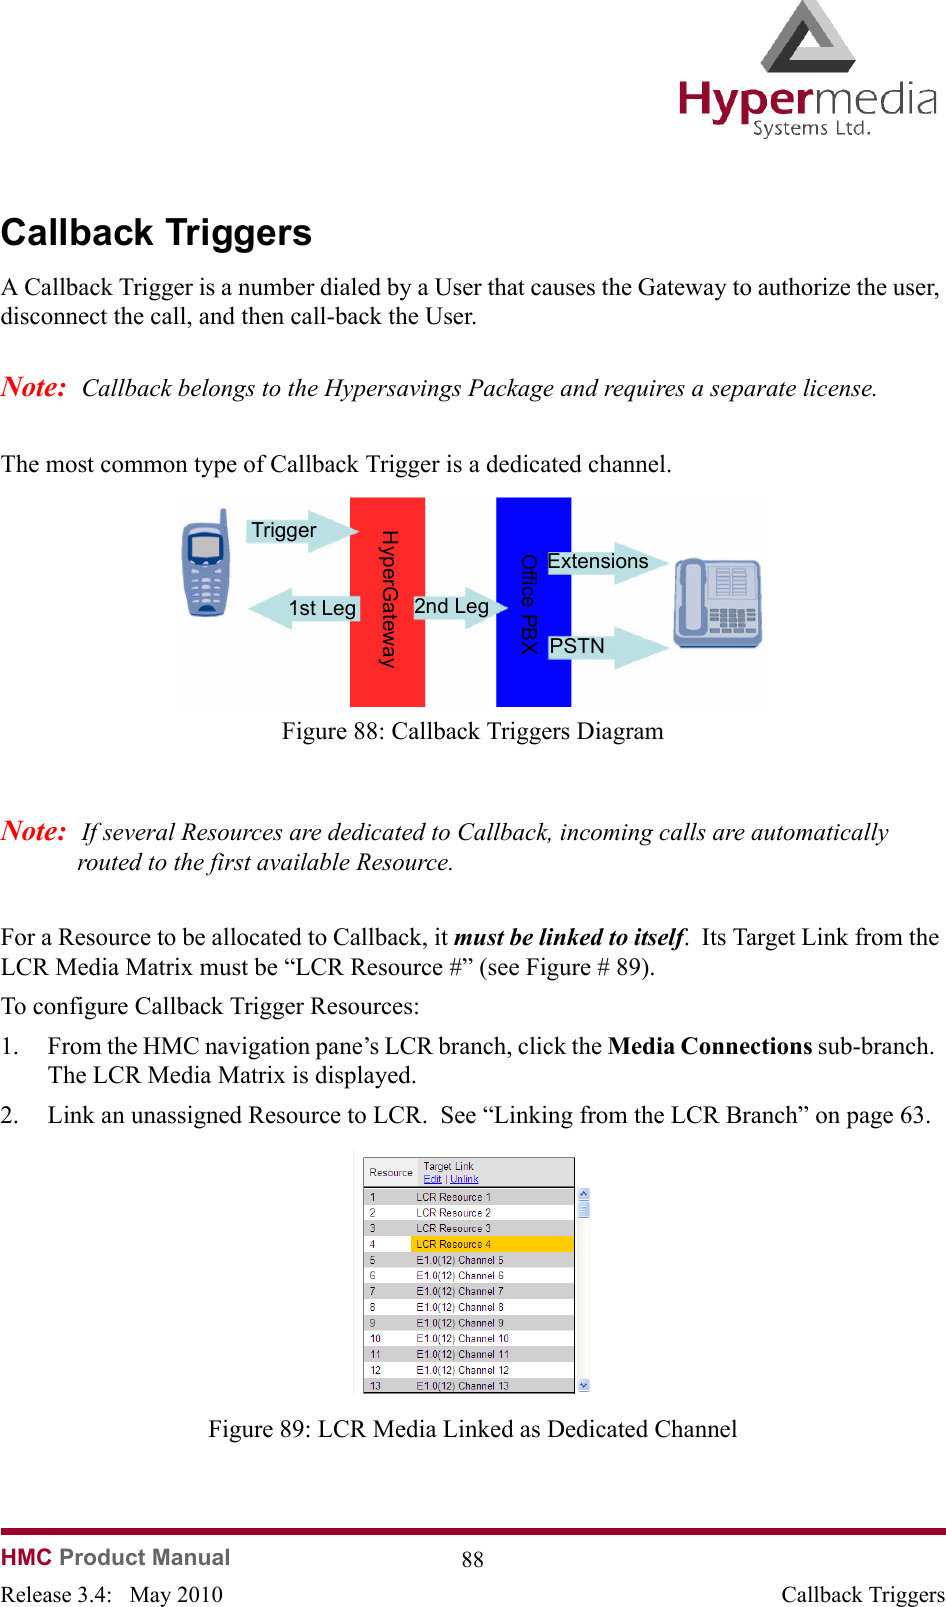   HMC Product Manual  88Release 3.4:   May 2010 Callback TriggersCallback TriggersA Callback Trigger is a number dialed by a User that causes the Gateway to authorize the user, disconnect the call, and then call-back the User.  Note:  Callback belongs to the Hypersavings Package and requires a separate license.The most common type of Callback Trigger is a dedicated channel.                Figure 88: Callback Triggers DiagramNote:  If several Resources are dedicated to Callback, incoming calls are automatically routed to the first available Resource.For a Resource to be allocated to Callback, it must be linked to itself.  Its Target Link from the LCR Media Matrix must be “LCR Resource #” (see Figure # 89).  To configure Callback Trigger Resources:1. From the HMC navigation pane’s LCR branch, click the Media Connections sub-branch.  The LCR Media Matrix is displayed.2. Link an unassigned Resource to LCR.  See “Linking from the LCR Branch” on page 63.              Figure 89: LCR Media Linked as Dedicated ChannelTrigger1st Leg 2nd LegExtensionsPSTNHyperGatewayOffice PBX